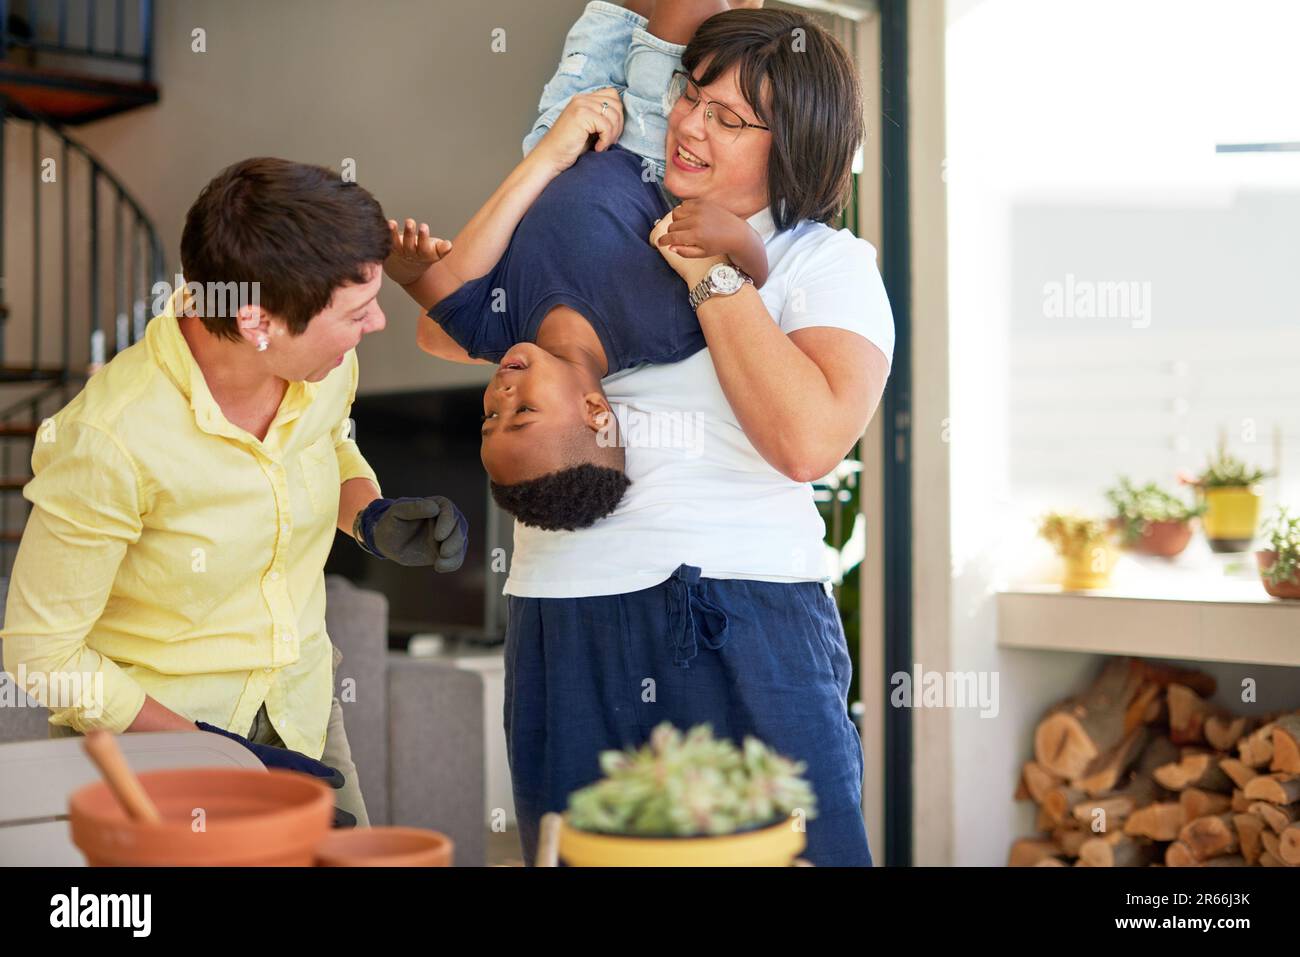 Happy, playful lesbian couple playing with son on patio Stock Photo